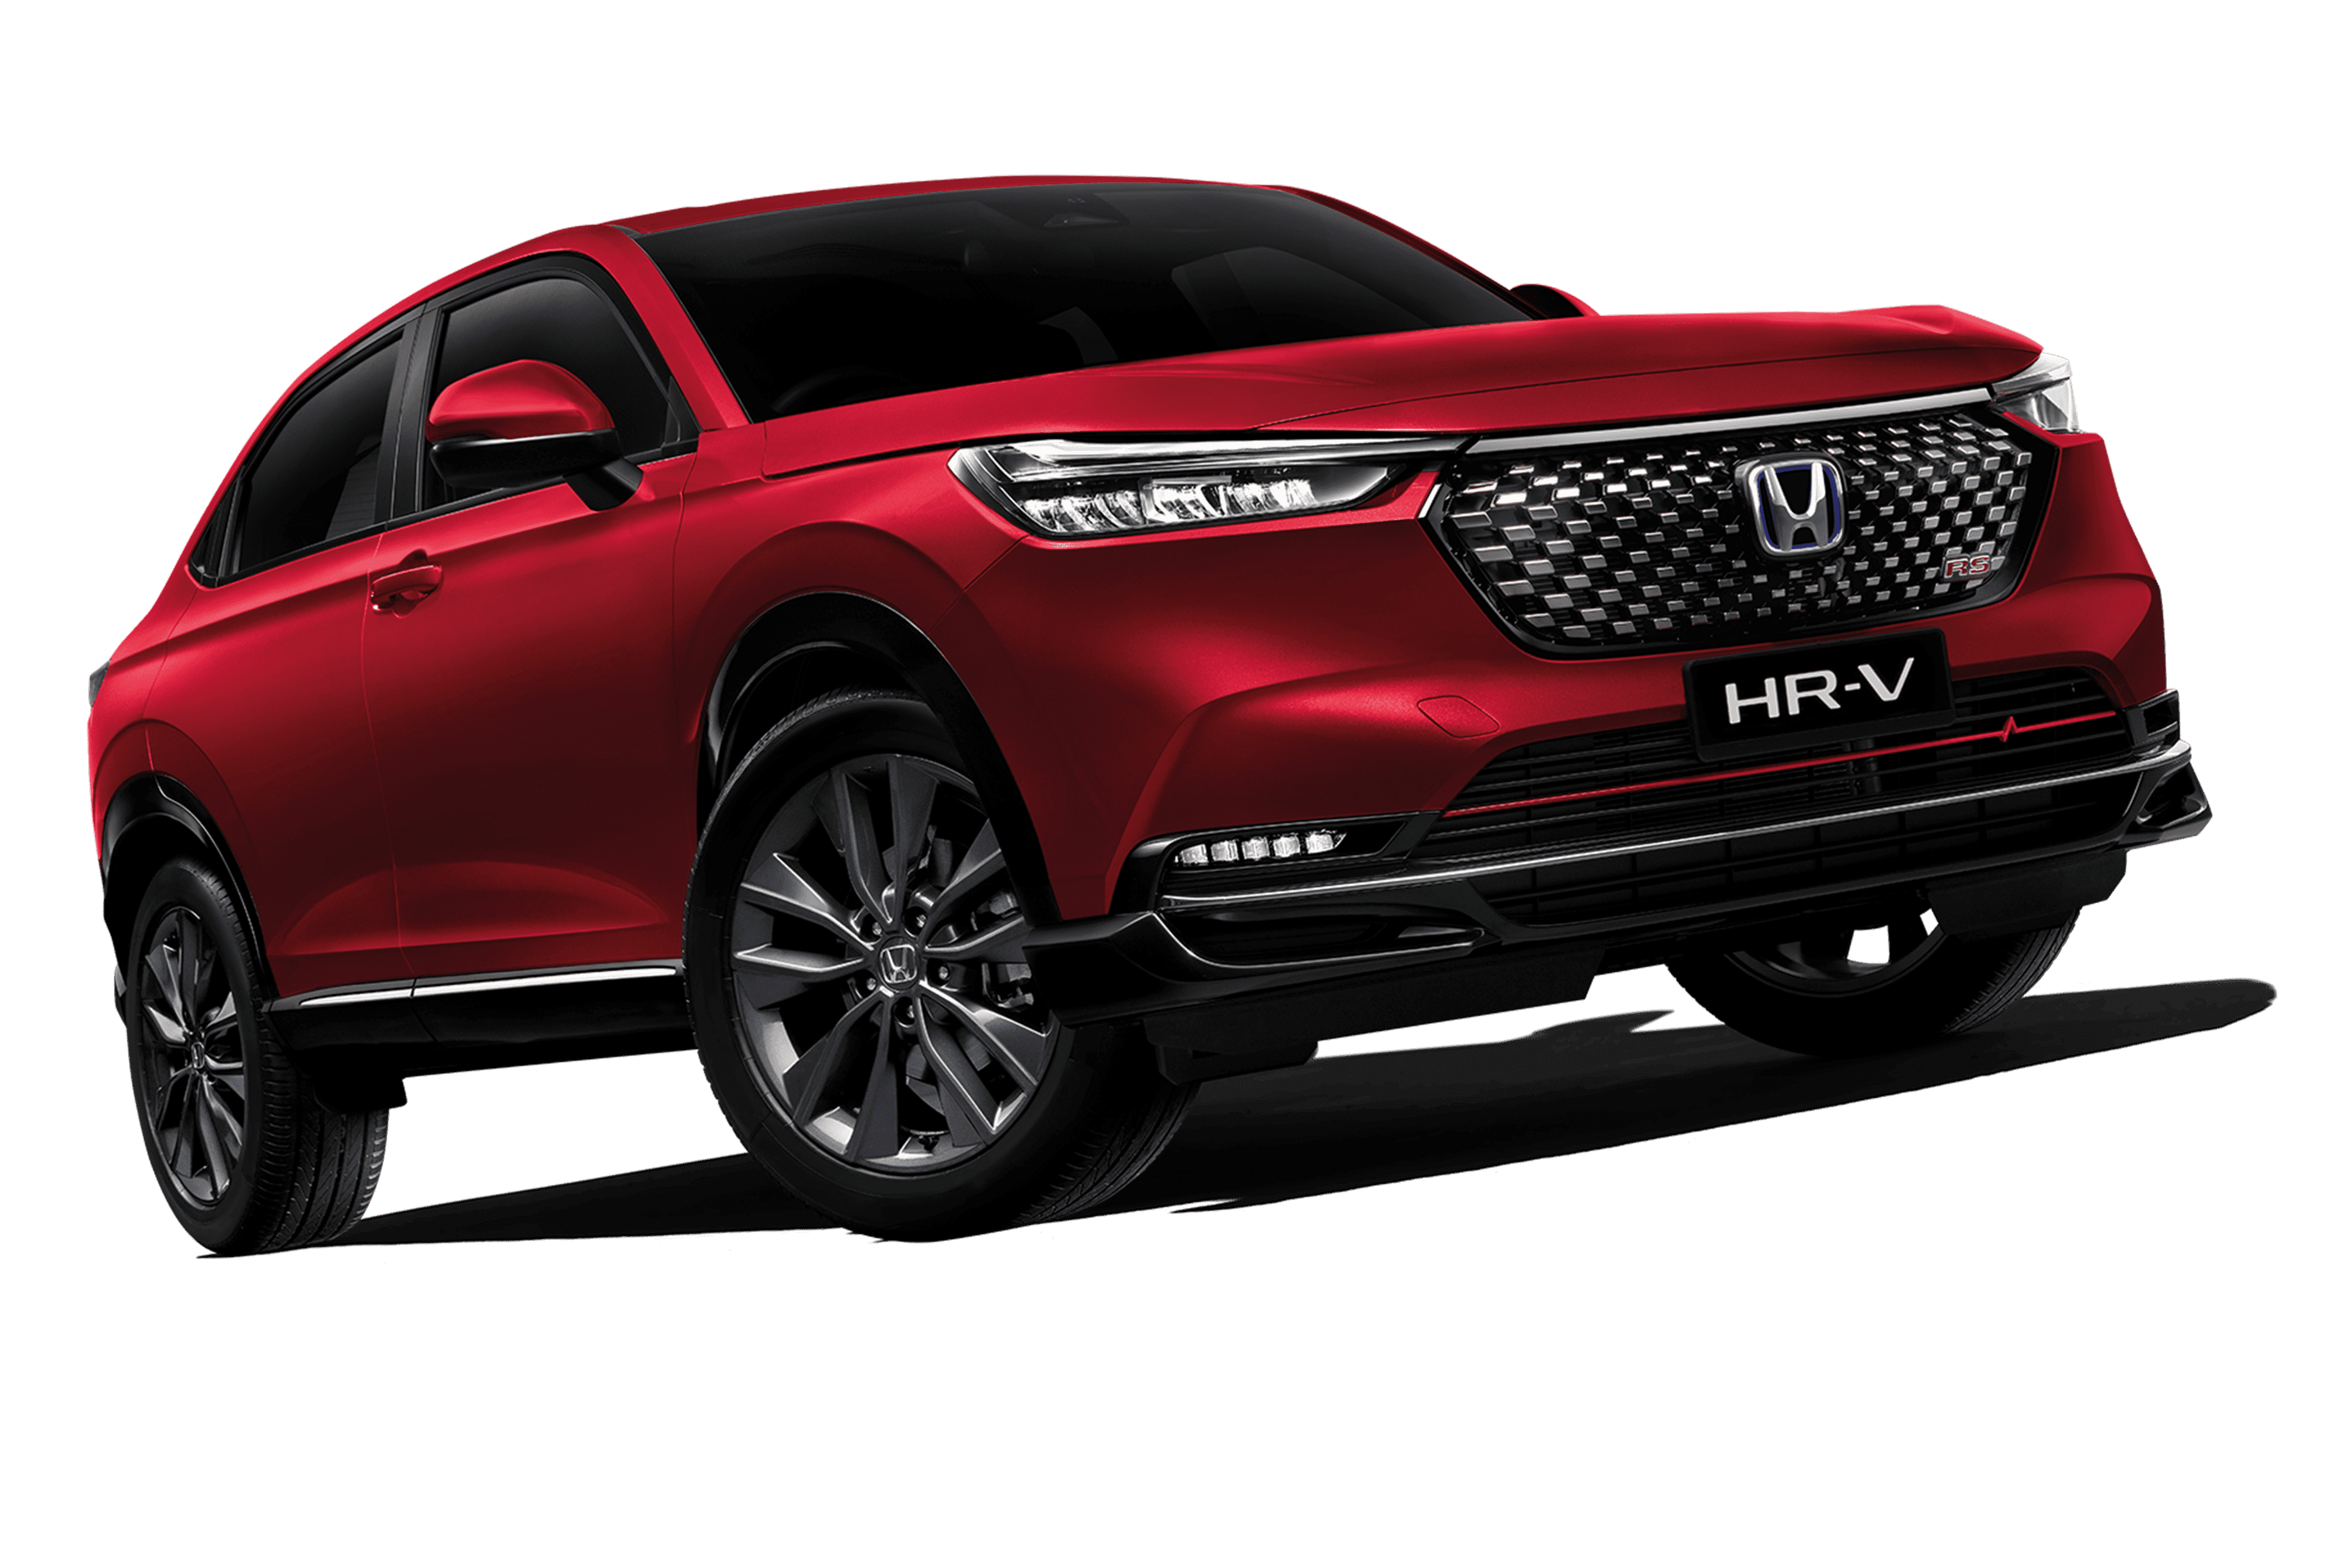 2022 Third Gen Honda HR-V Vs Second Gen: All You Need to Know